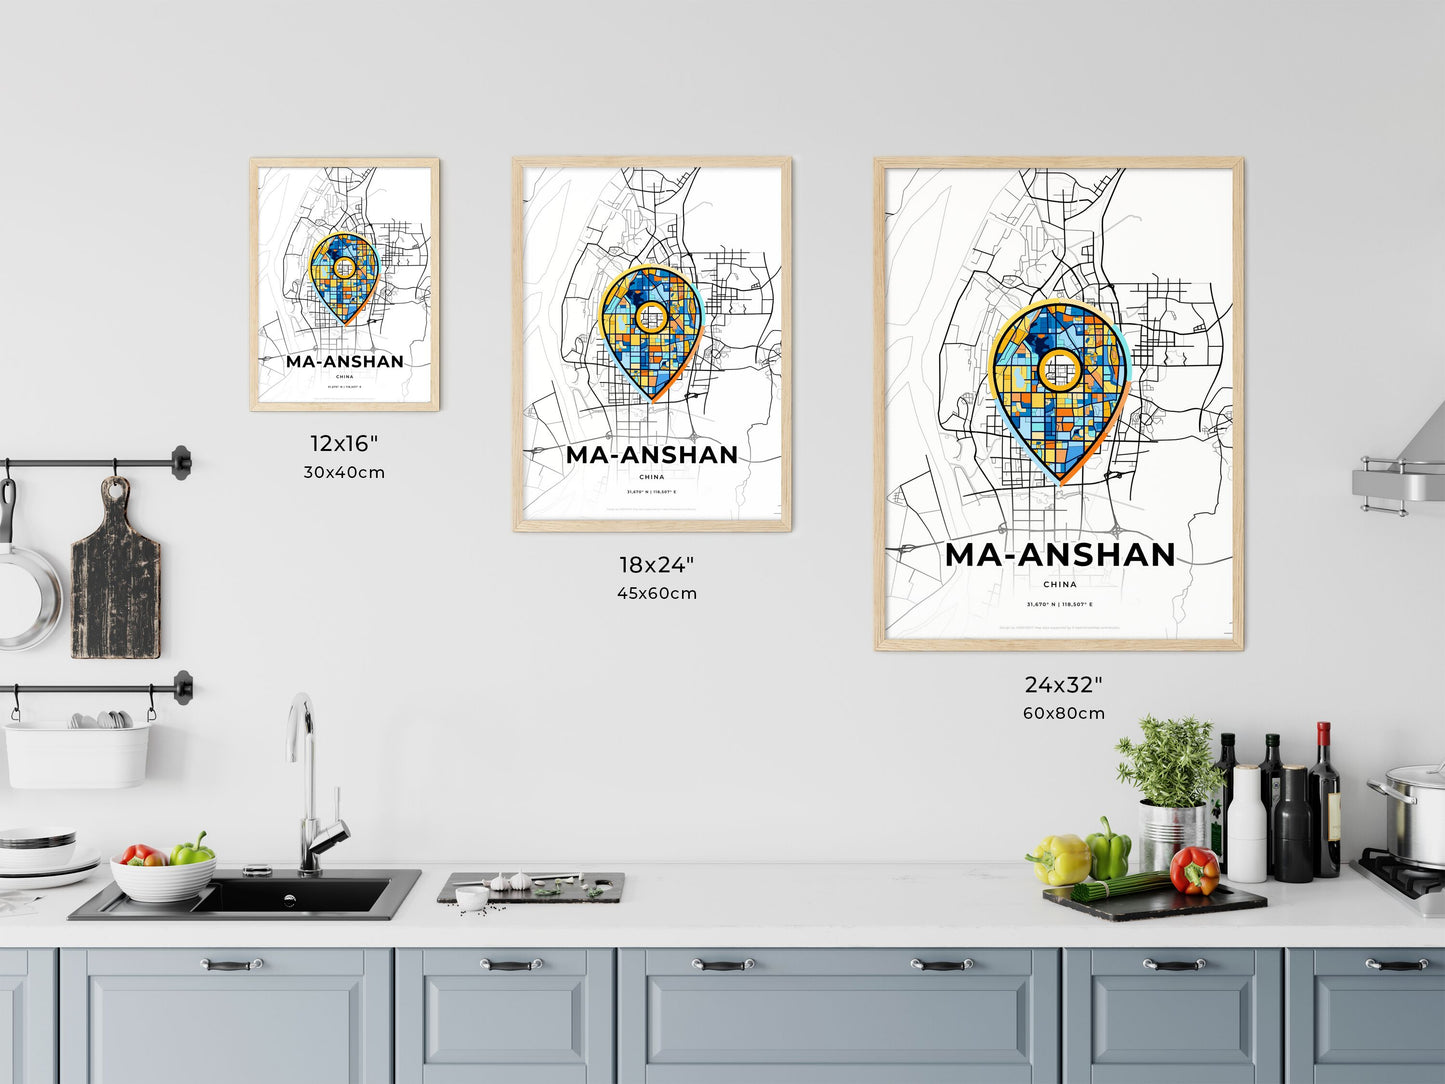 MA-ANSHAN CHINA minimal art map with a colorful icon. Where it all began, Couple map gift.